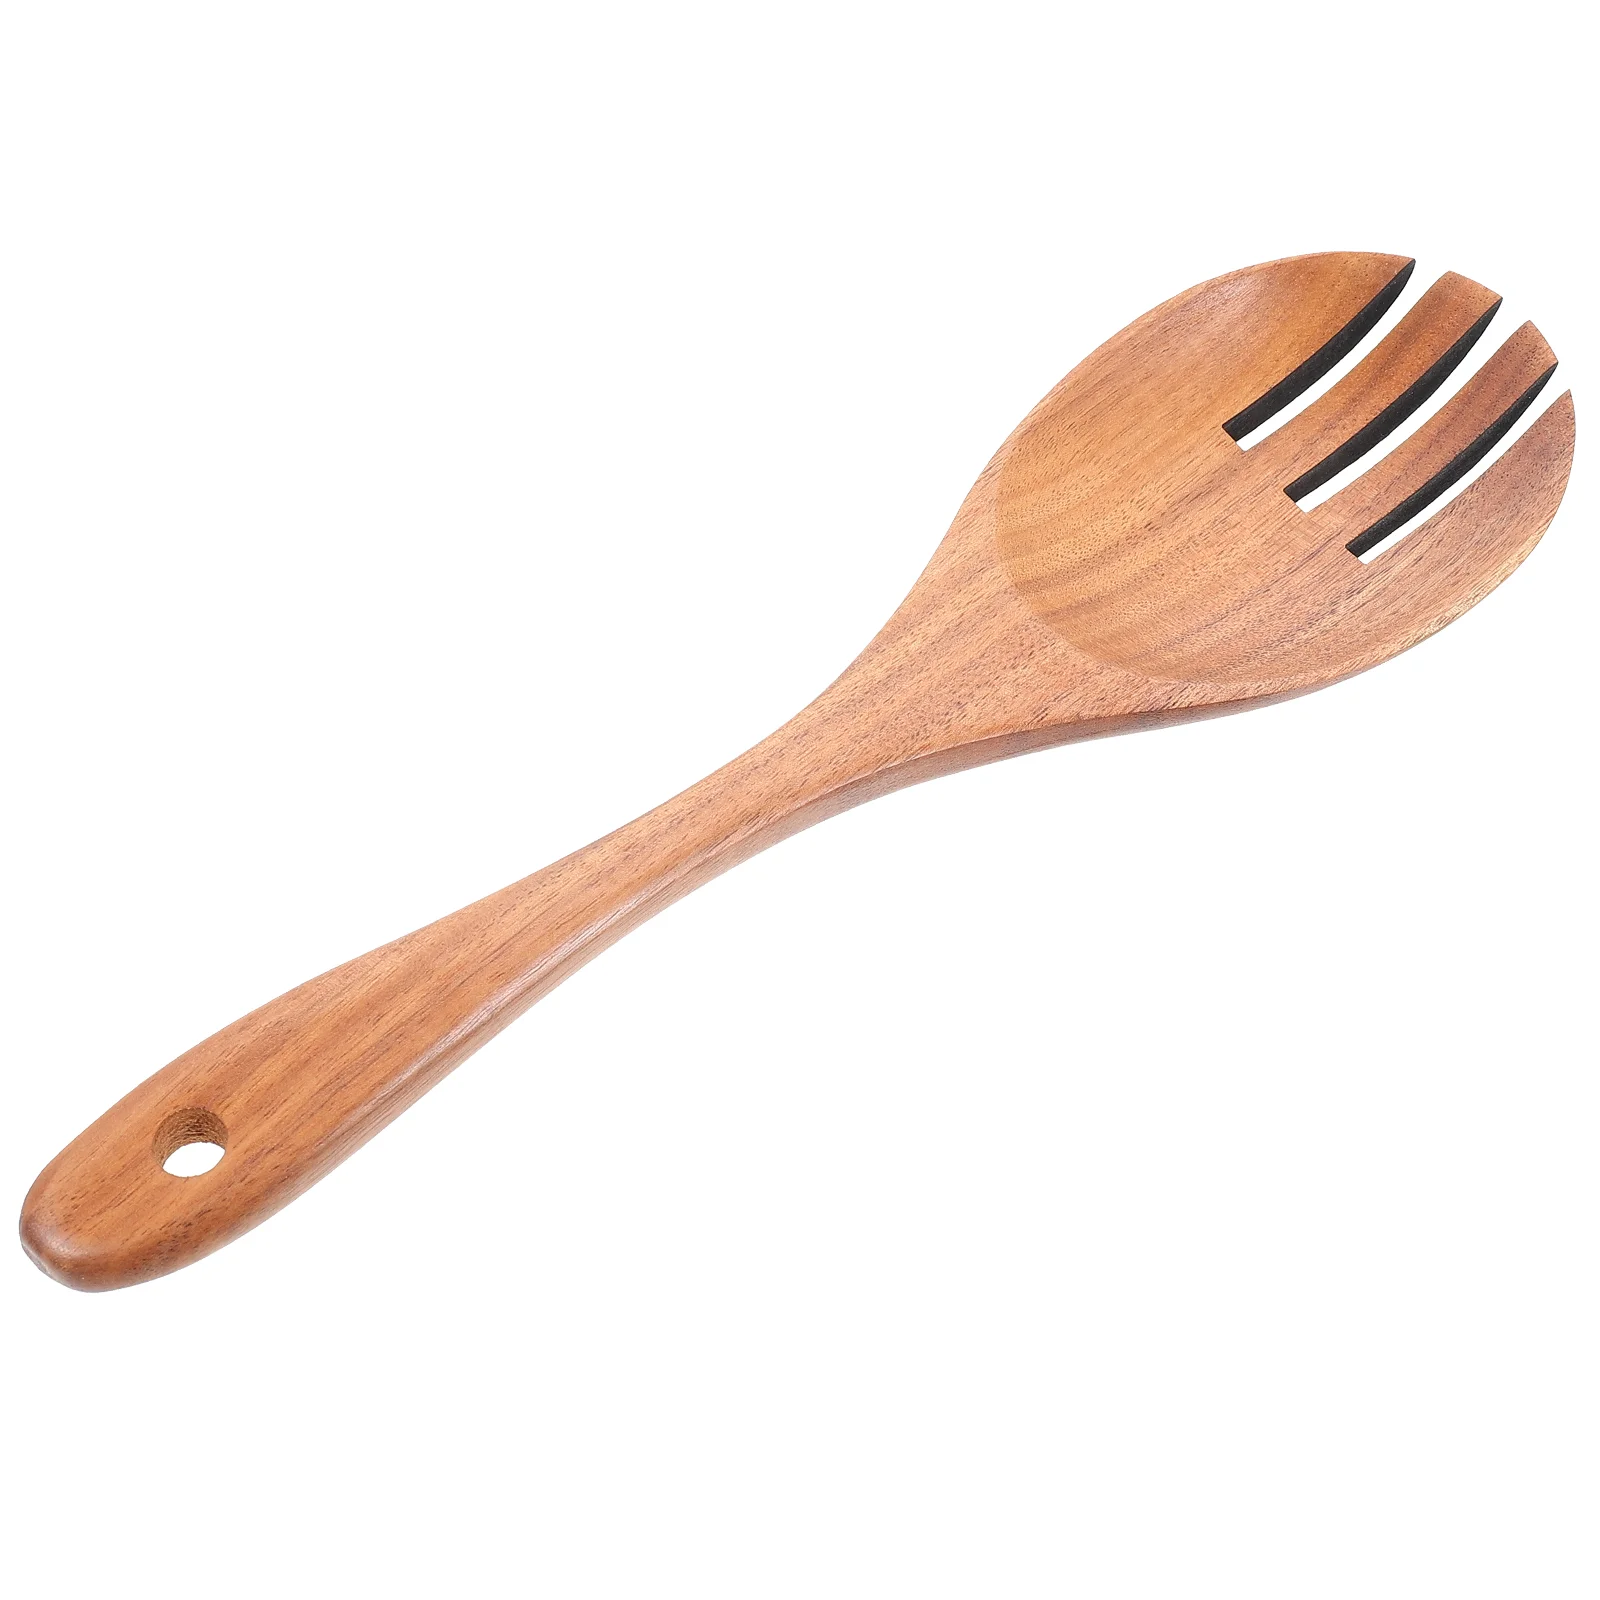 

Salad Fork Serving Wood Server Spoon Wooden Tongs Pasta Utensils Cooking Claws Kitchen Spoons Dinner Mixing Spaghetti Forks